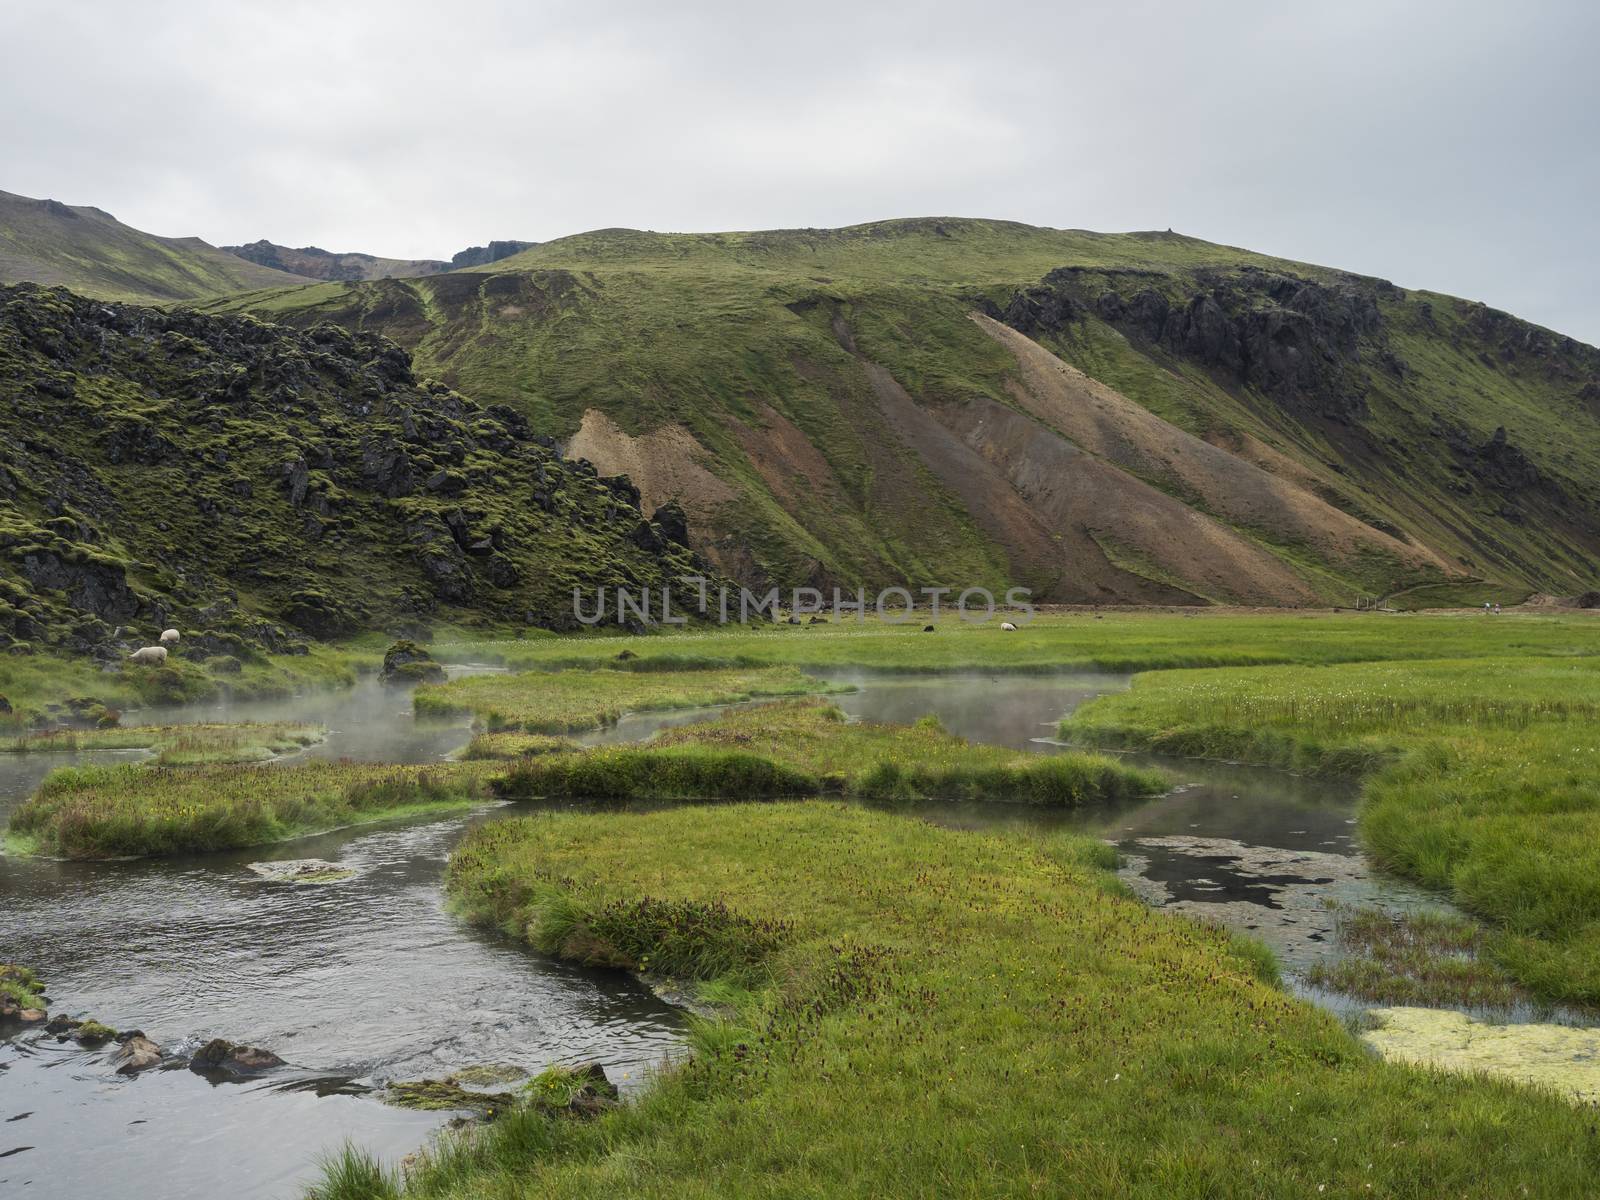 View on geothermal area with natural hot spring, thermal baths in Landmannalaugar camp site, Iceland. Grass meadow, lava fields and mountains in background.